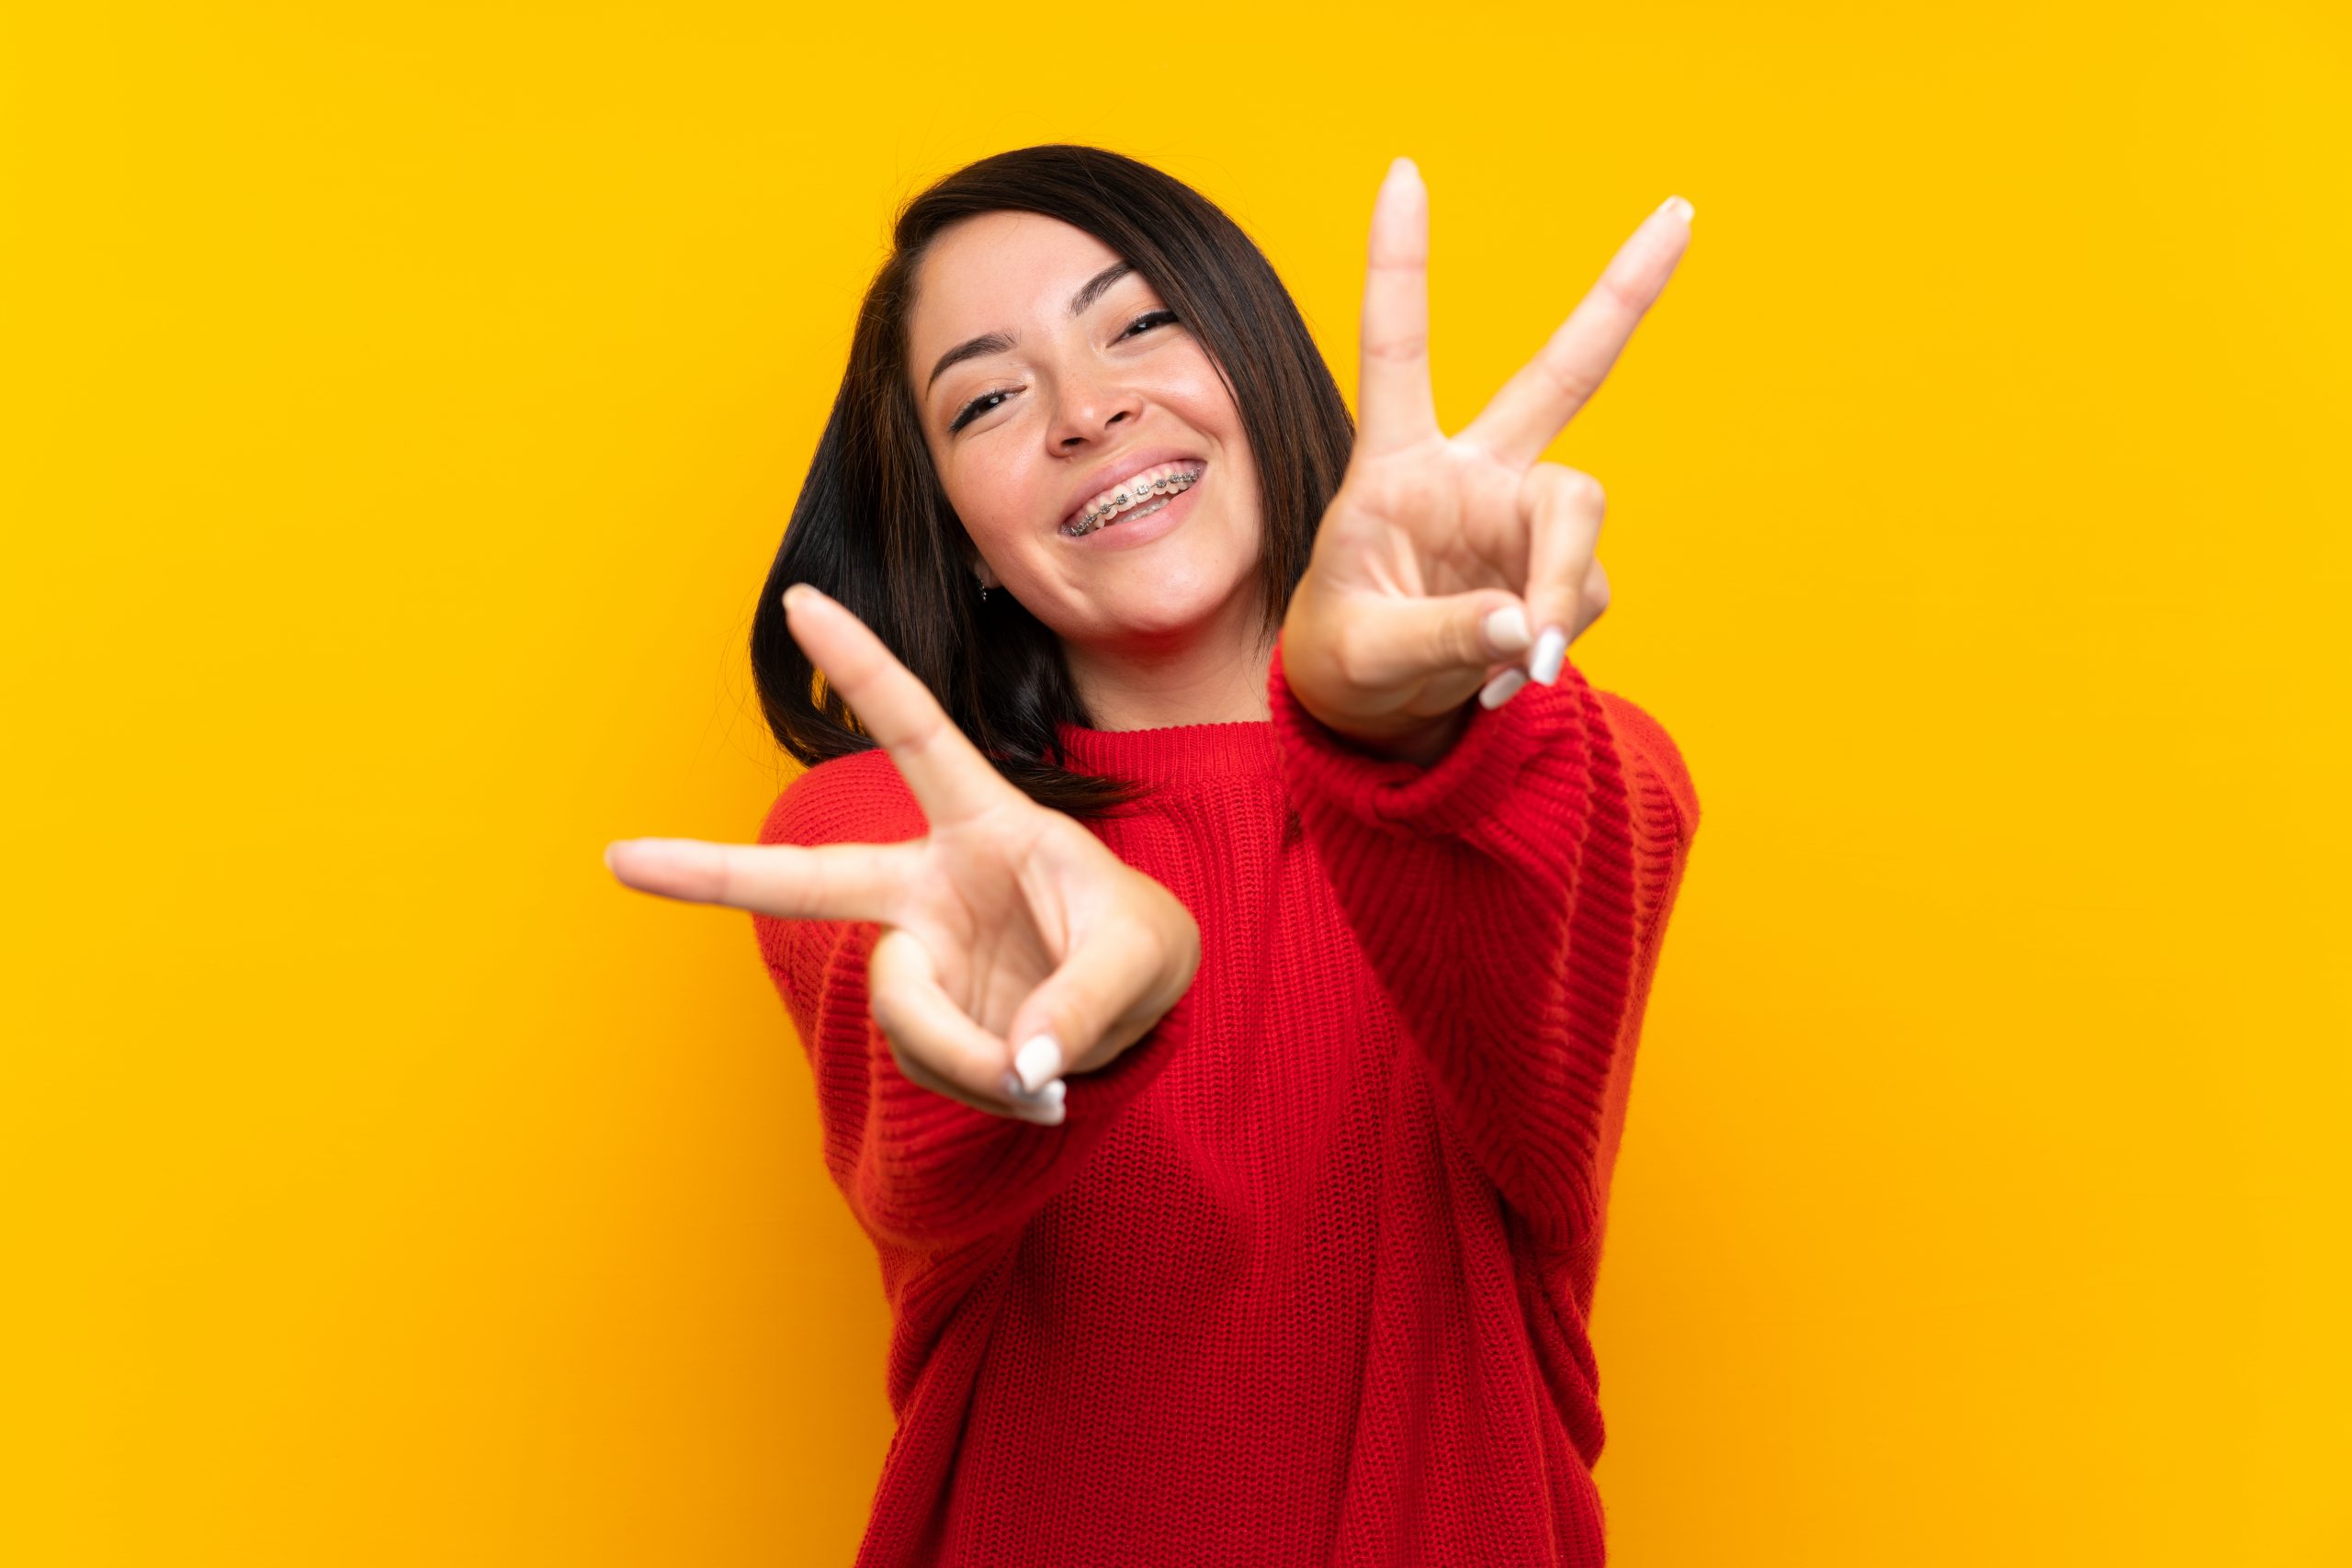 Young Mexican woman with red sweater over yellow wall smiling and showing victory sign